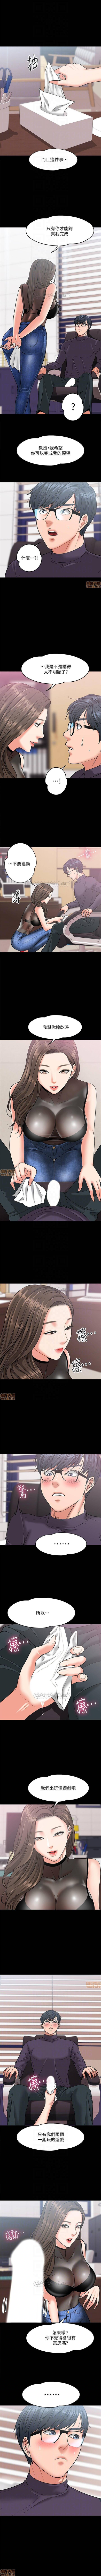 PROFESSOR, ARE YOU JUST GOING TO LOOK AT ME? | DESIRE SWAMP | 教授，你還等什麼? Ch. 5 [Chinese] Manhwa 2